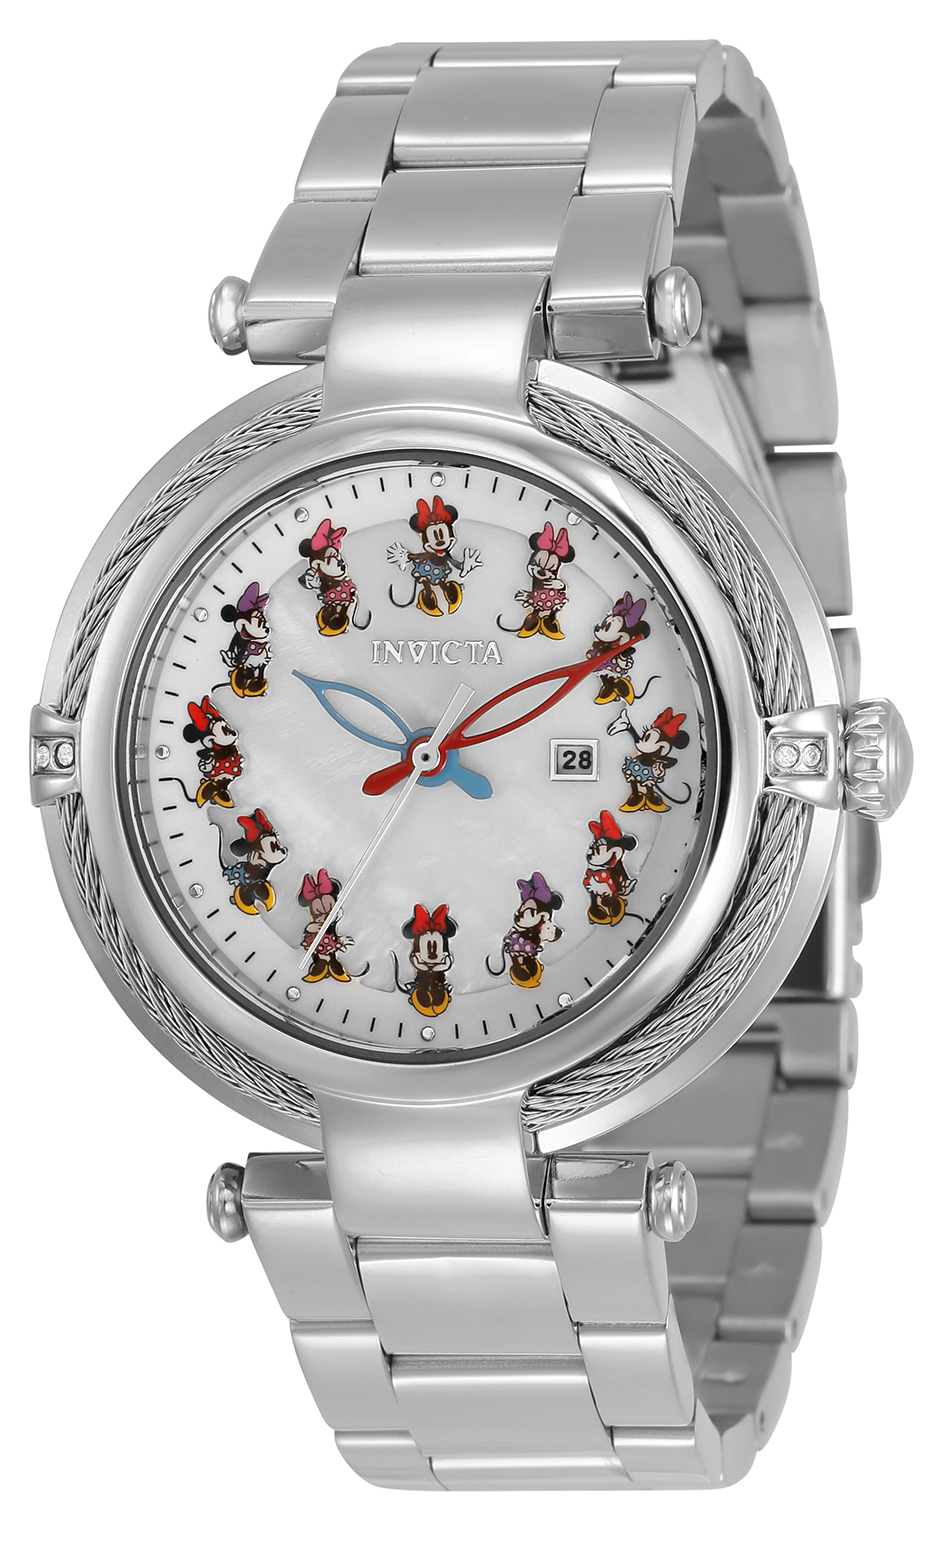 Invicta Disney Limited Edition Minnie Mouse Women's Watch w/ Mother of Pearl Dial - 40mm, Steel (34111)